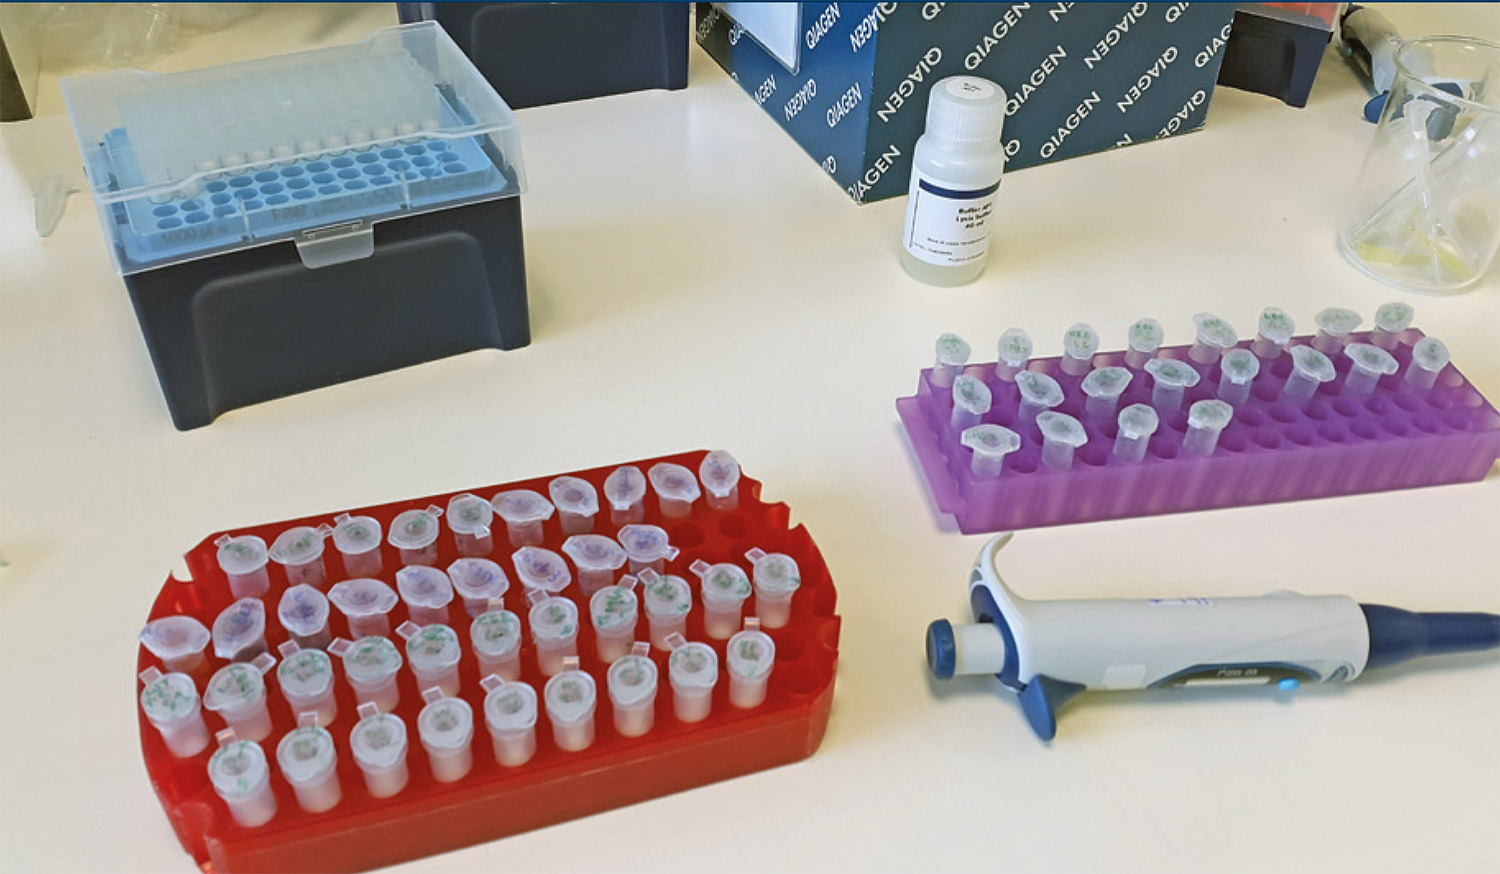 An in-progress fungal DNA isolation from environmental samples, preparing molecular samples for amplification and sequencing.